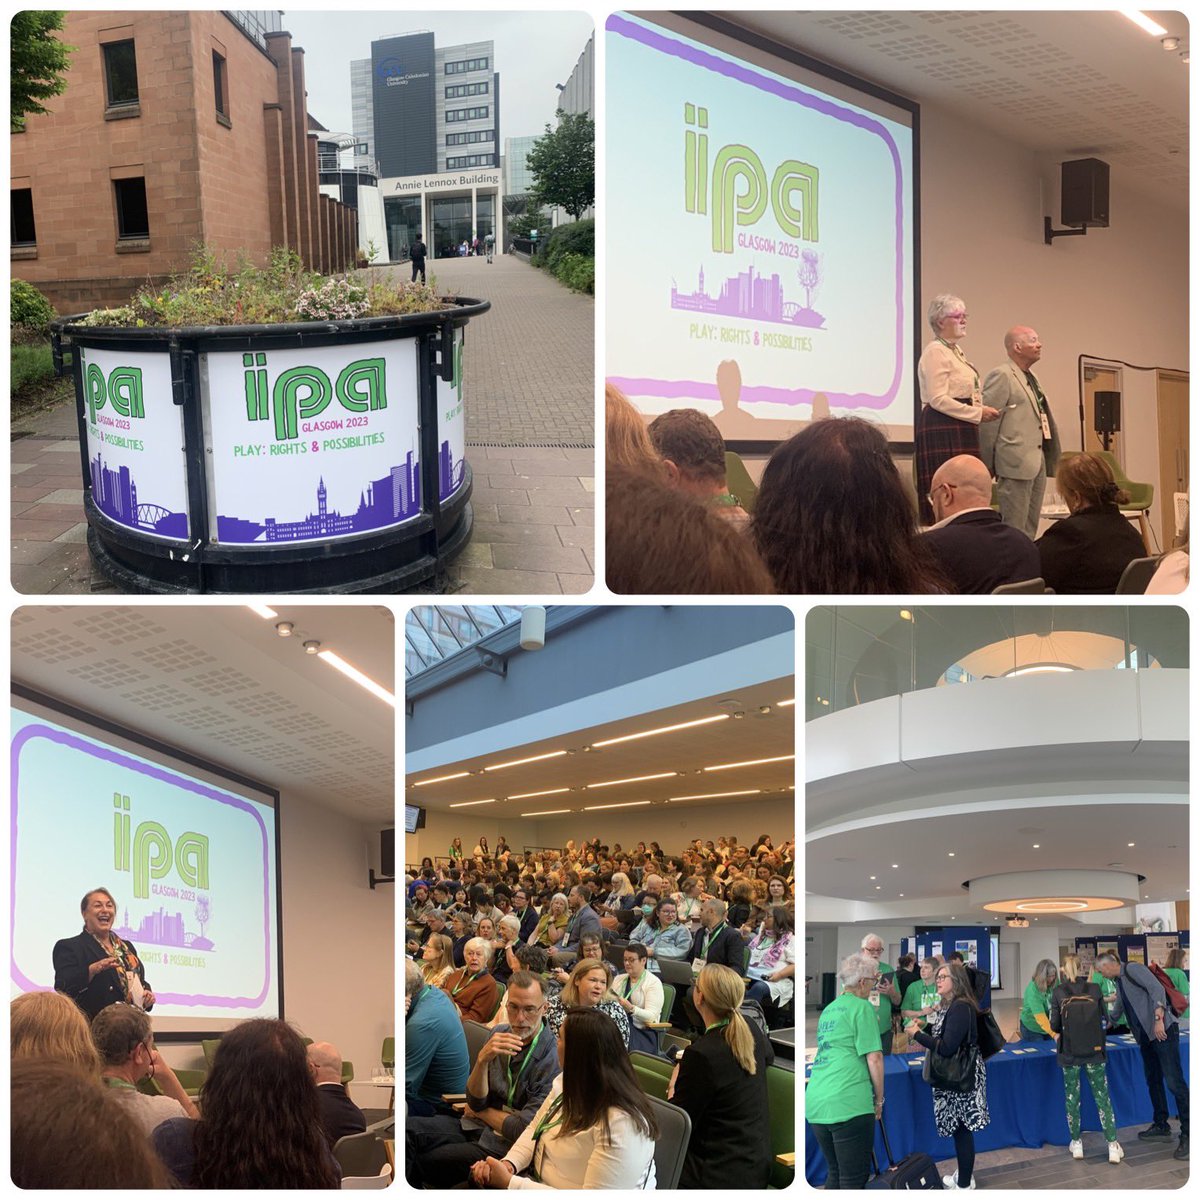 It’s here!! It’s a real privilege to peek inside the opening ceremony of #IPAGlasgow2023! Such a warm atmosphere @EventsGCU! The amazing steering committee have done a fantastic job! We’re so proud to be hosting this wonderful conference in #Glasgow! Welcome everyone! 😊🏴󠁧󠁢󠁳󠁣󠁴󠁿